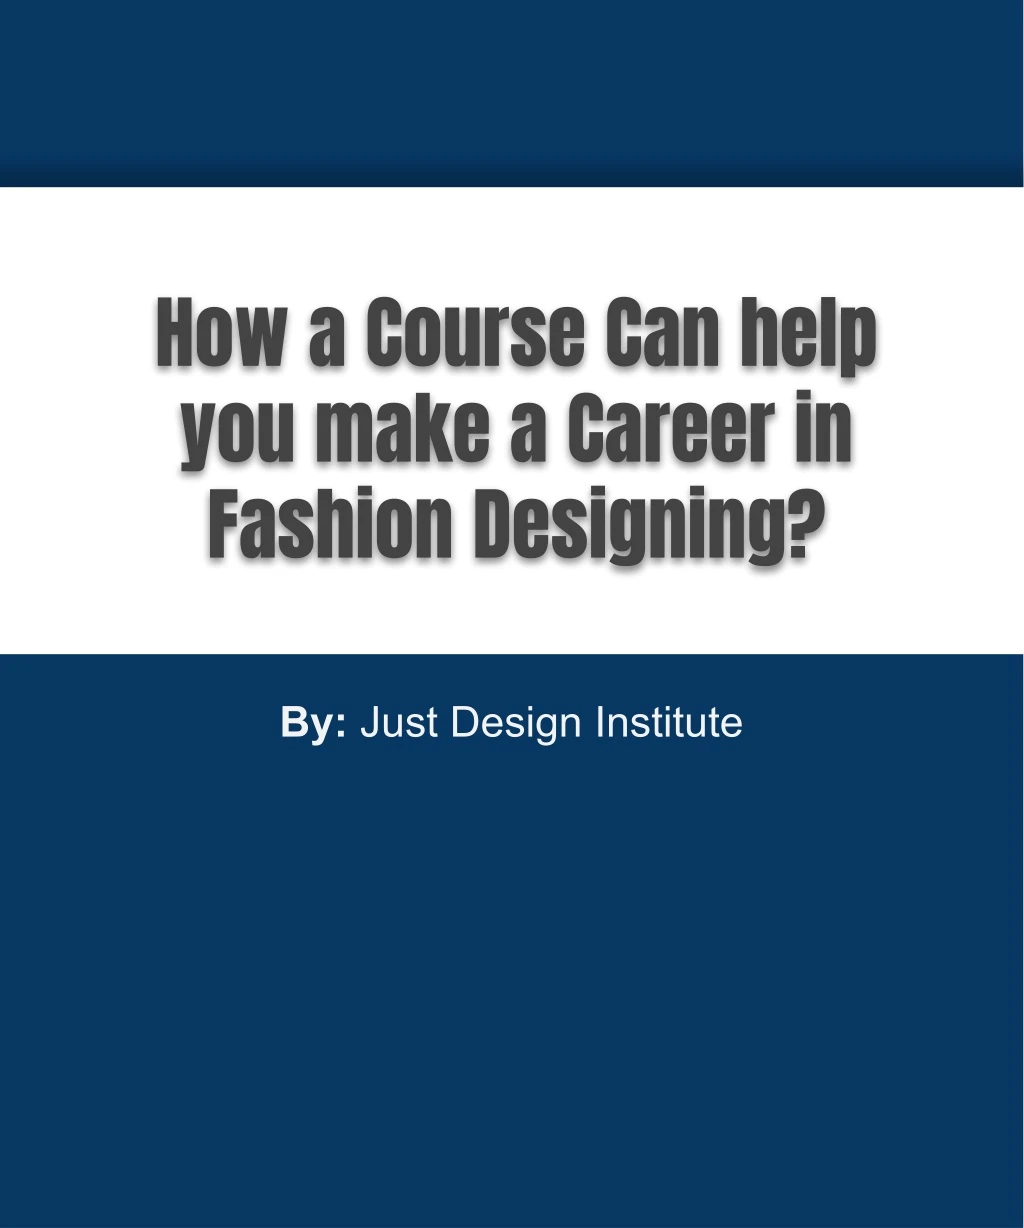 how a course can help you make a career